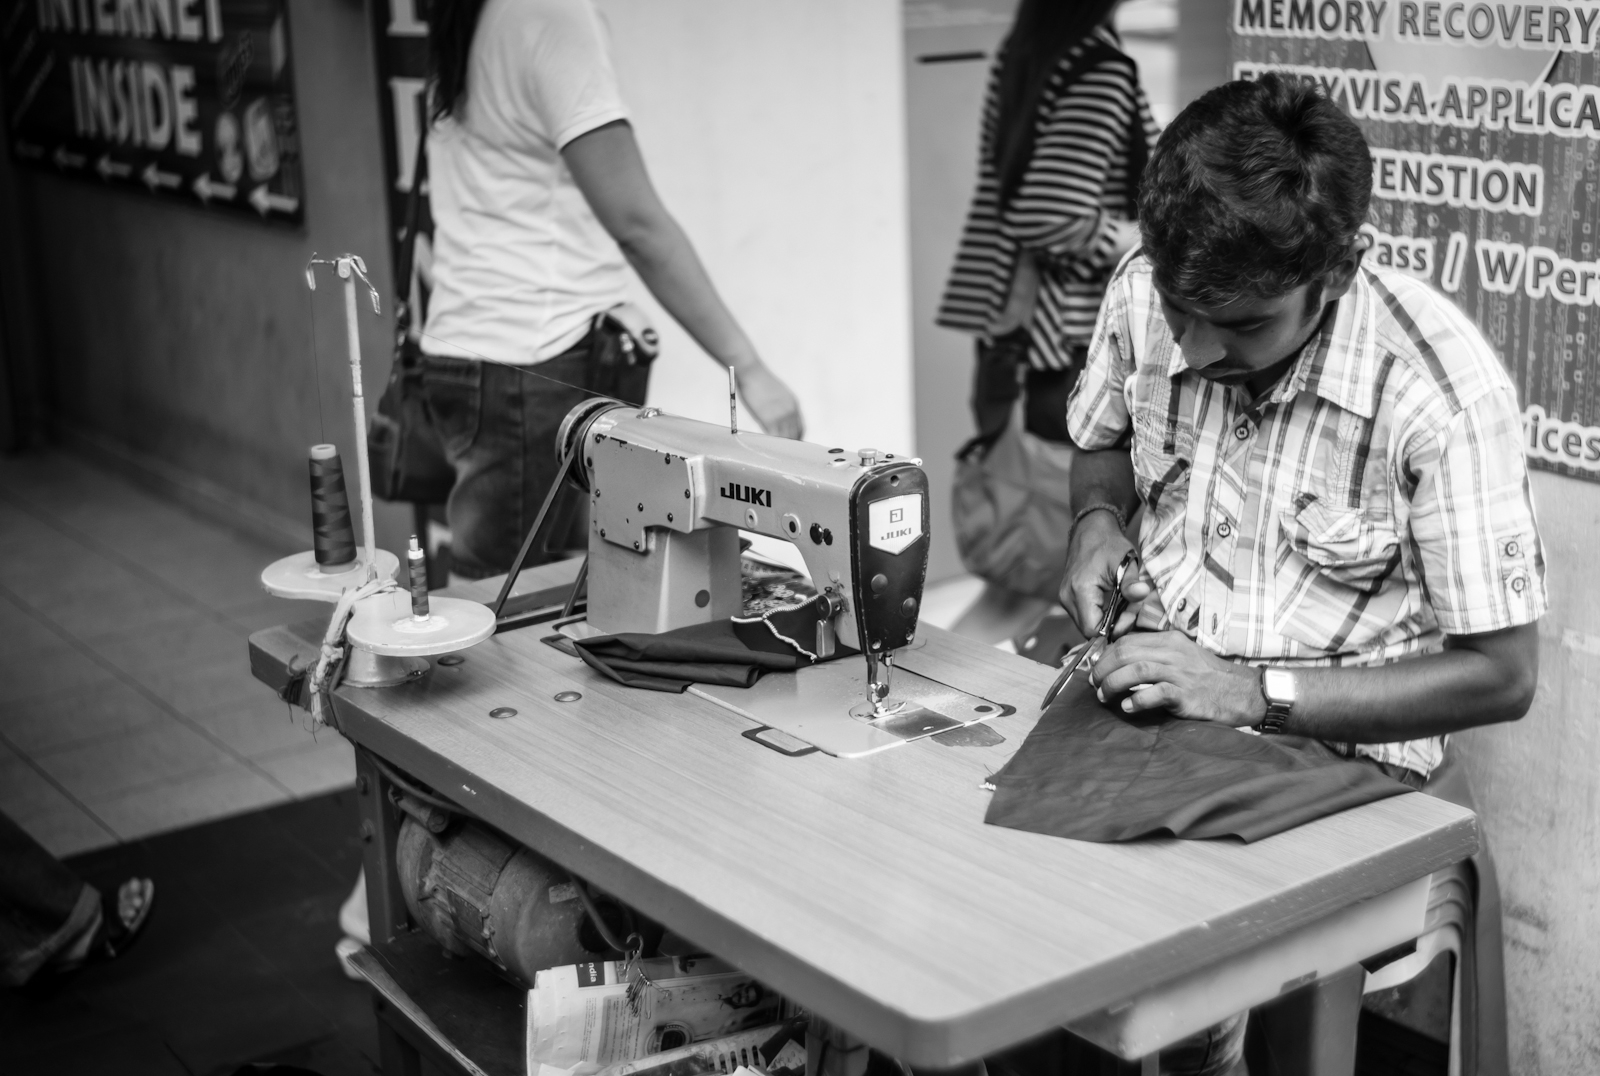 Street photography - Alteration service in Little India